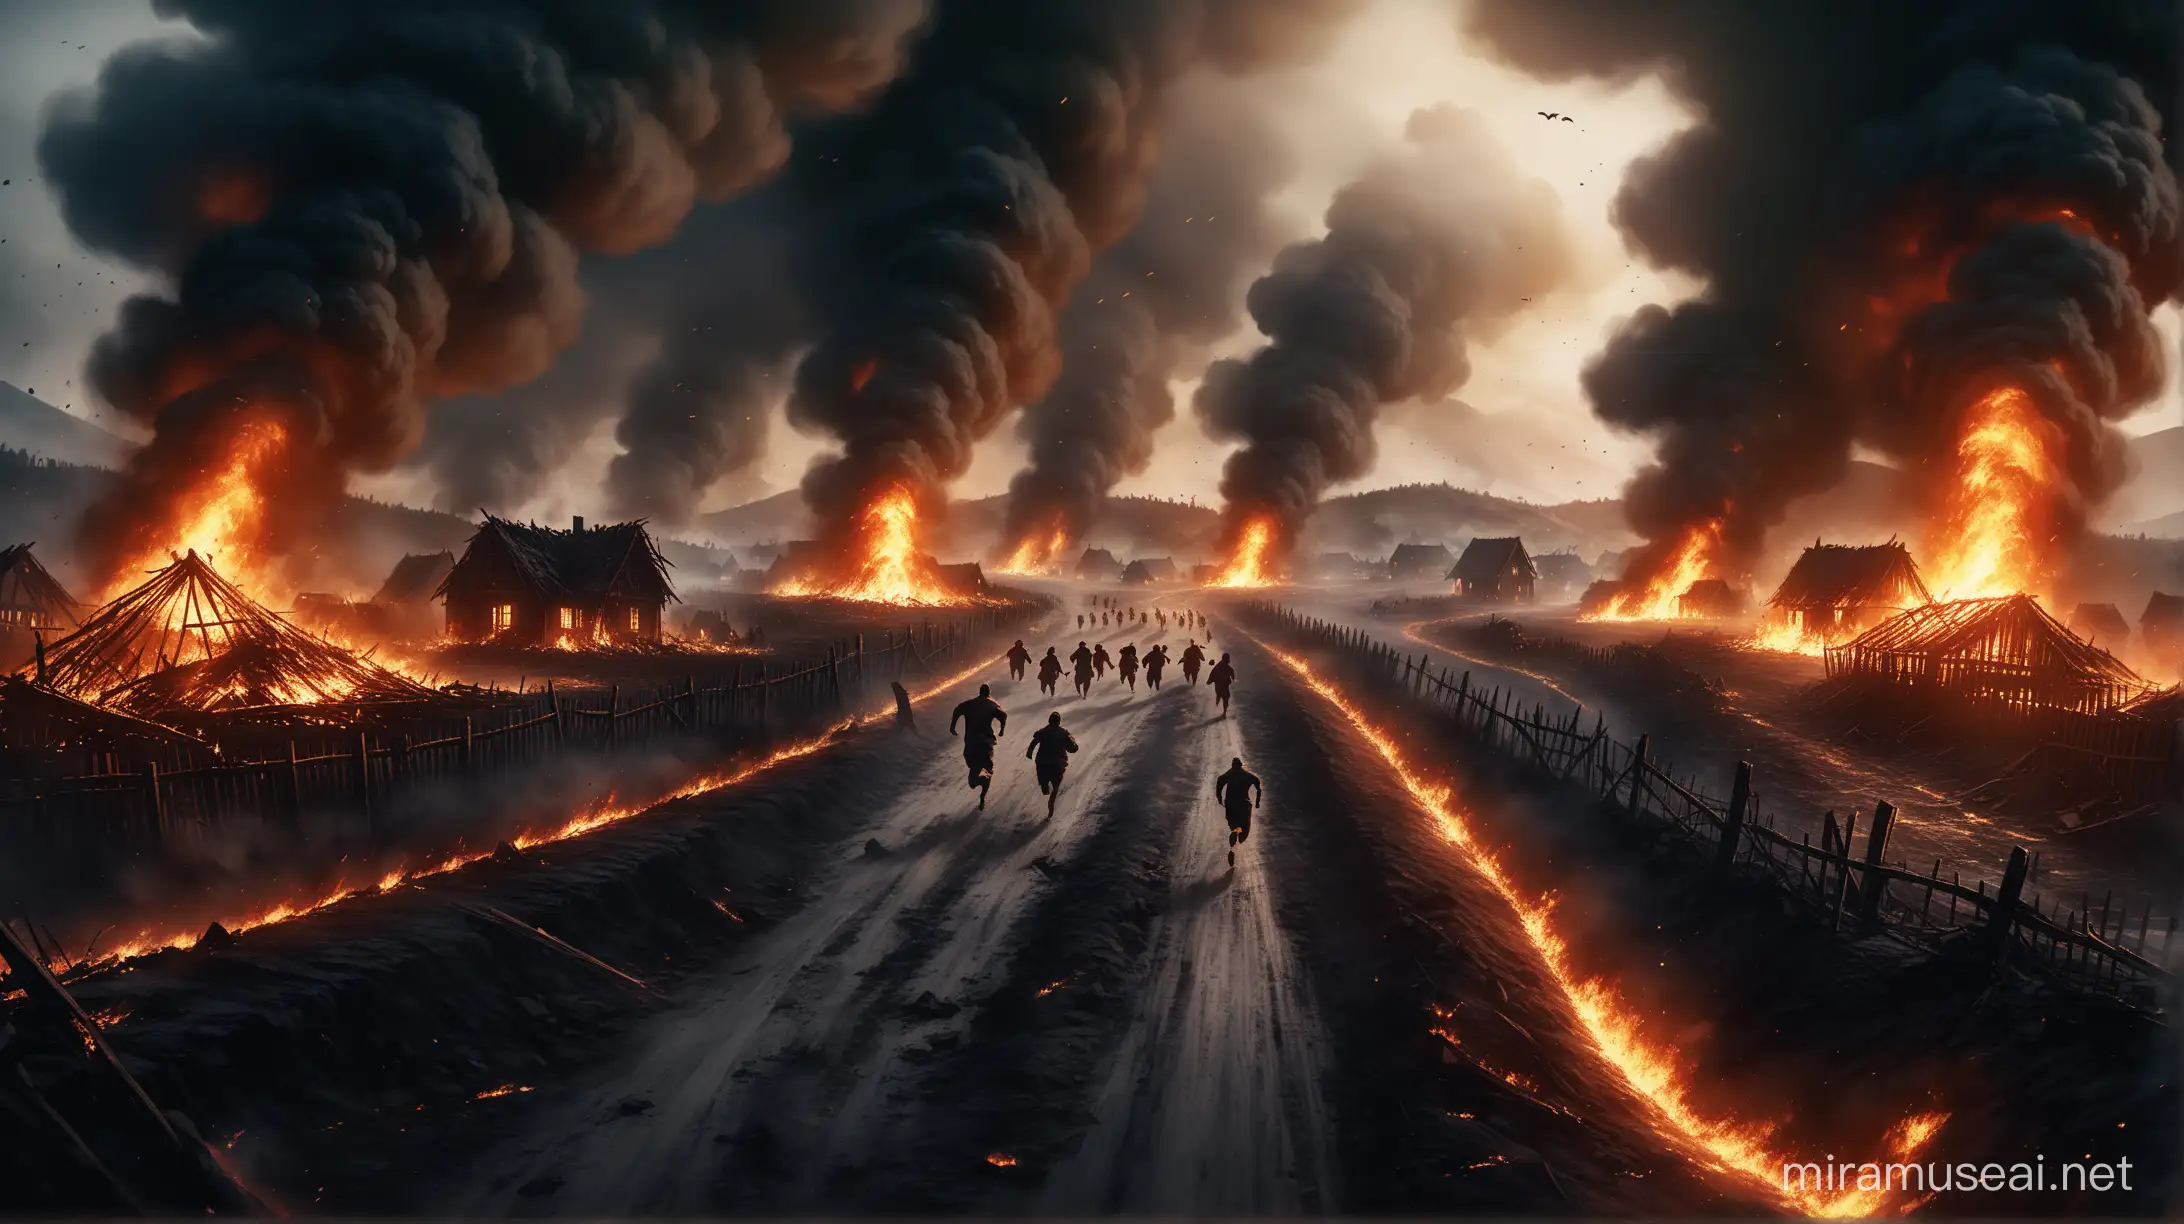 8k dramatic scene, a dramatic vivid illustration depicting the destruction of an old village by Nephilims. portray chaos and devastation with houses engulfed in flames, food spilled on the ground, and villagers running in panic. the atmosphere filled with screams and frantic movement. emotions of distress and terror, use dark cinematic colors, Highlight the contrast between the serenity of the village and the sudden onslaught of destruction, landscape view, use dark cinematic colors with villagers running for their lives. close up shot
